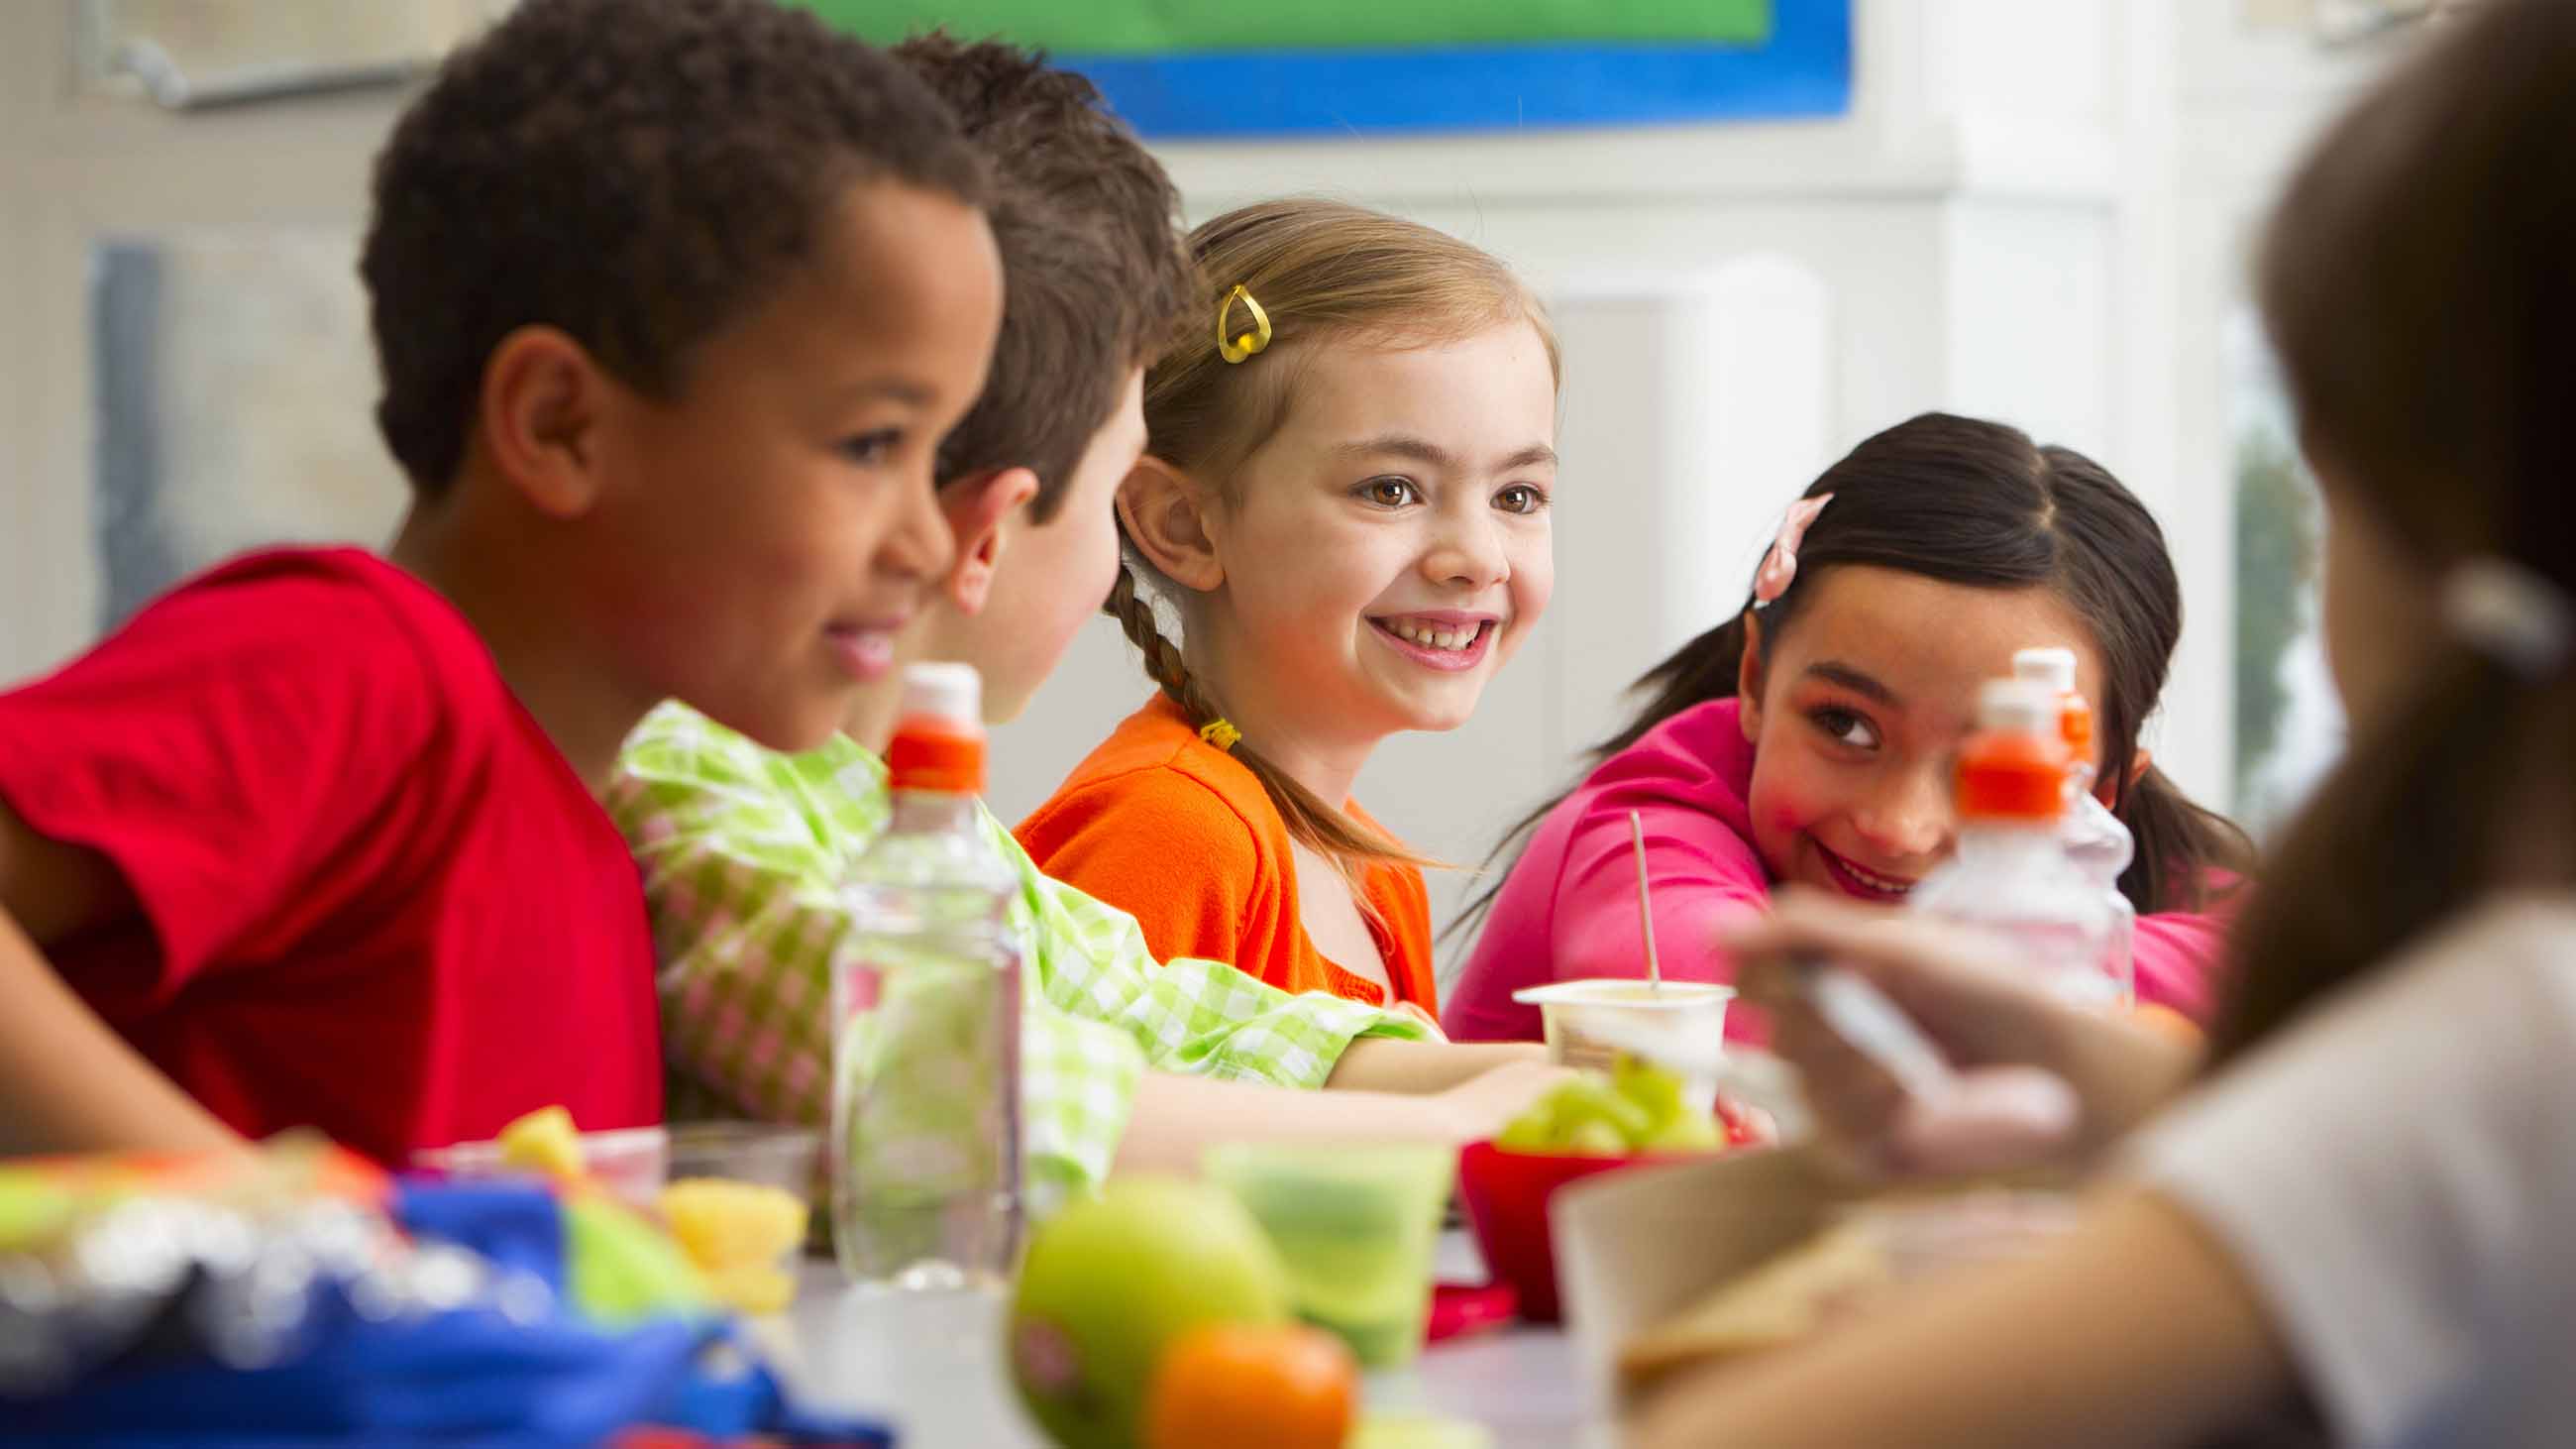 White House budget director Mick Mulvaney has said after school programs that provide kids with food don’t work. The evidence says otherwise.